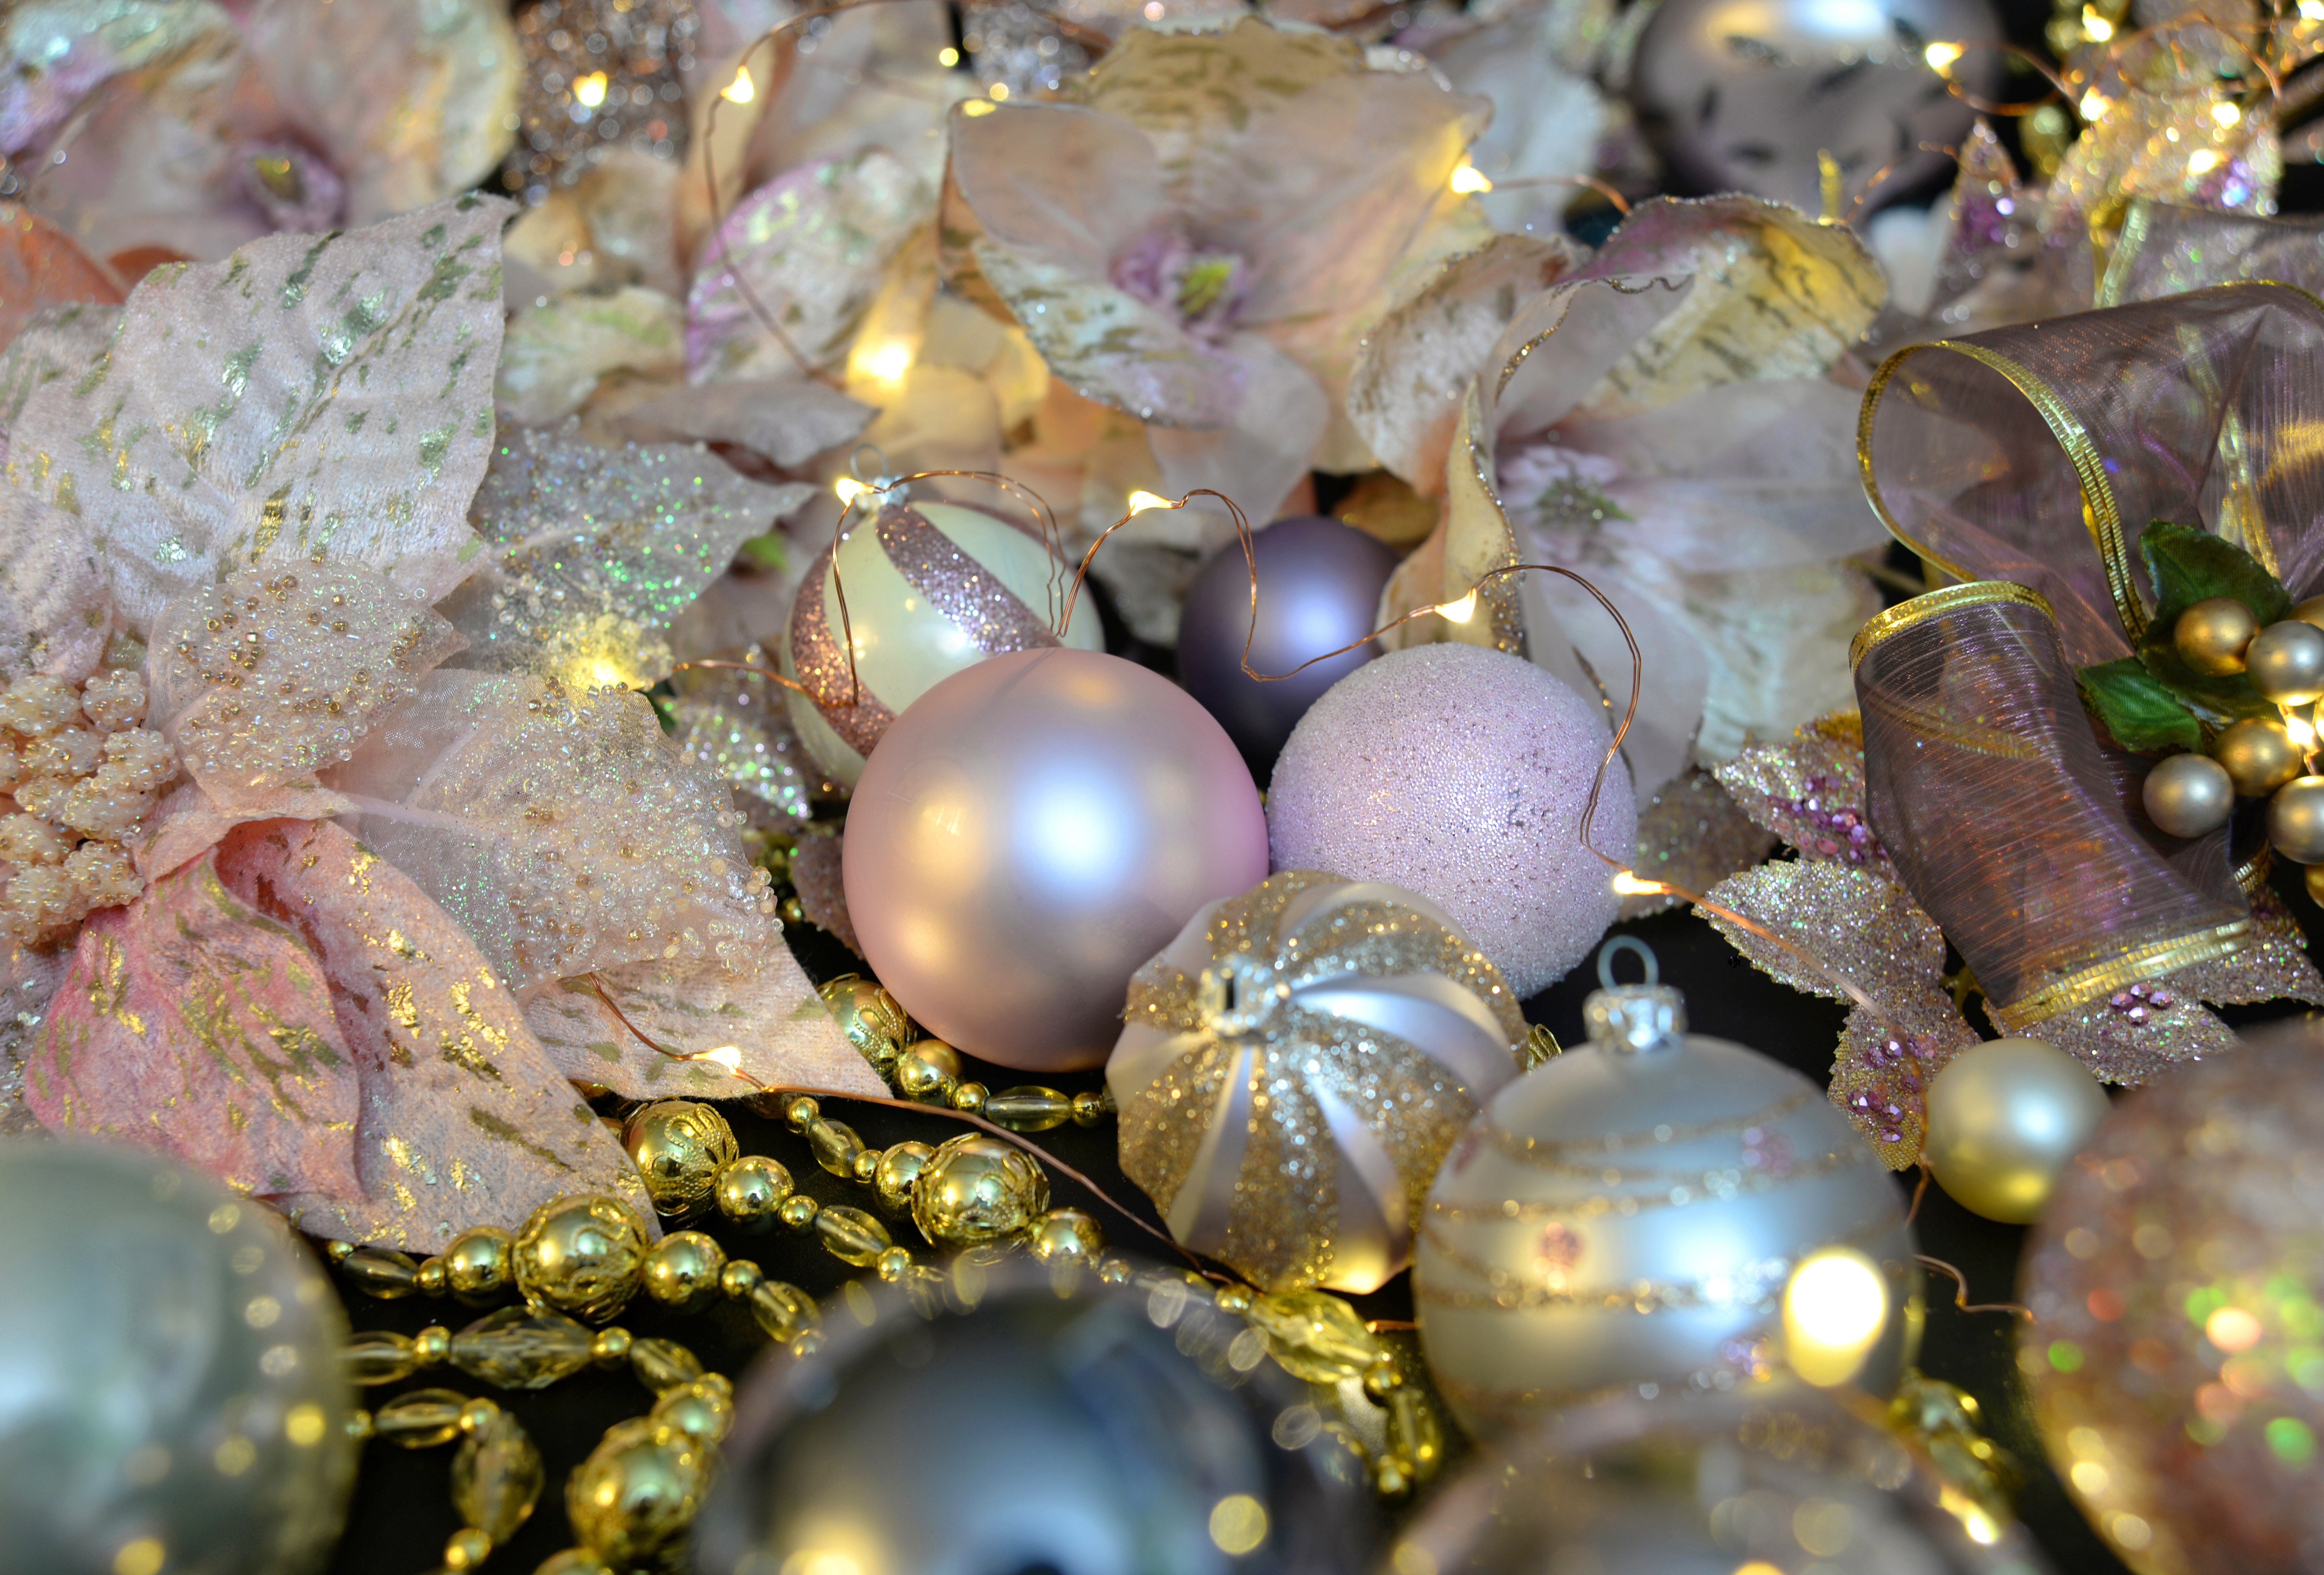 134784 download wallpaper christmas decorations, holidays, balls, decoration screensavers and pictures for free